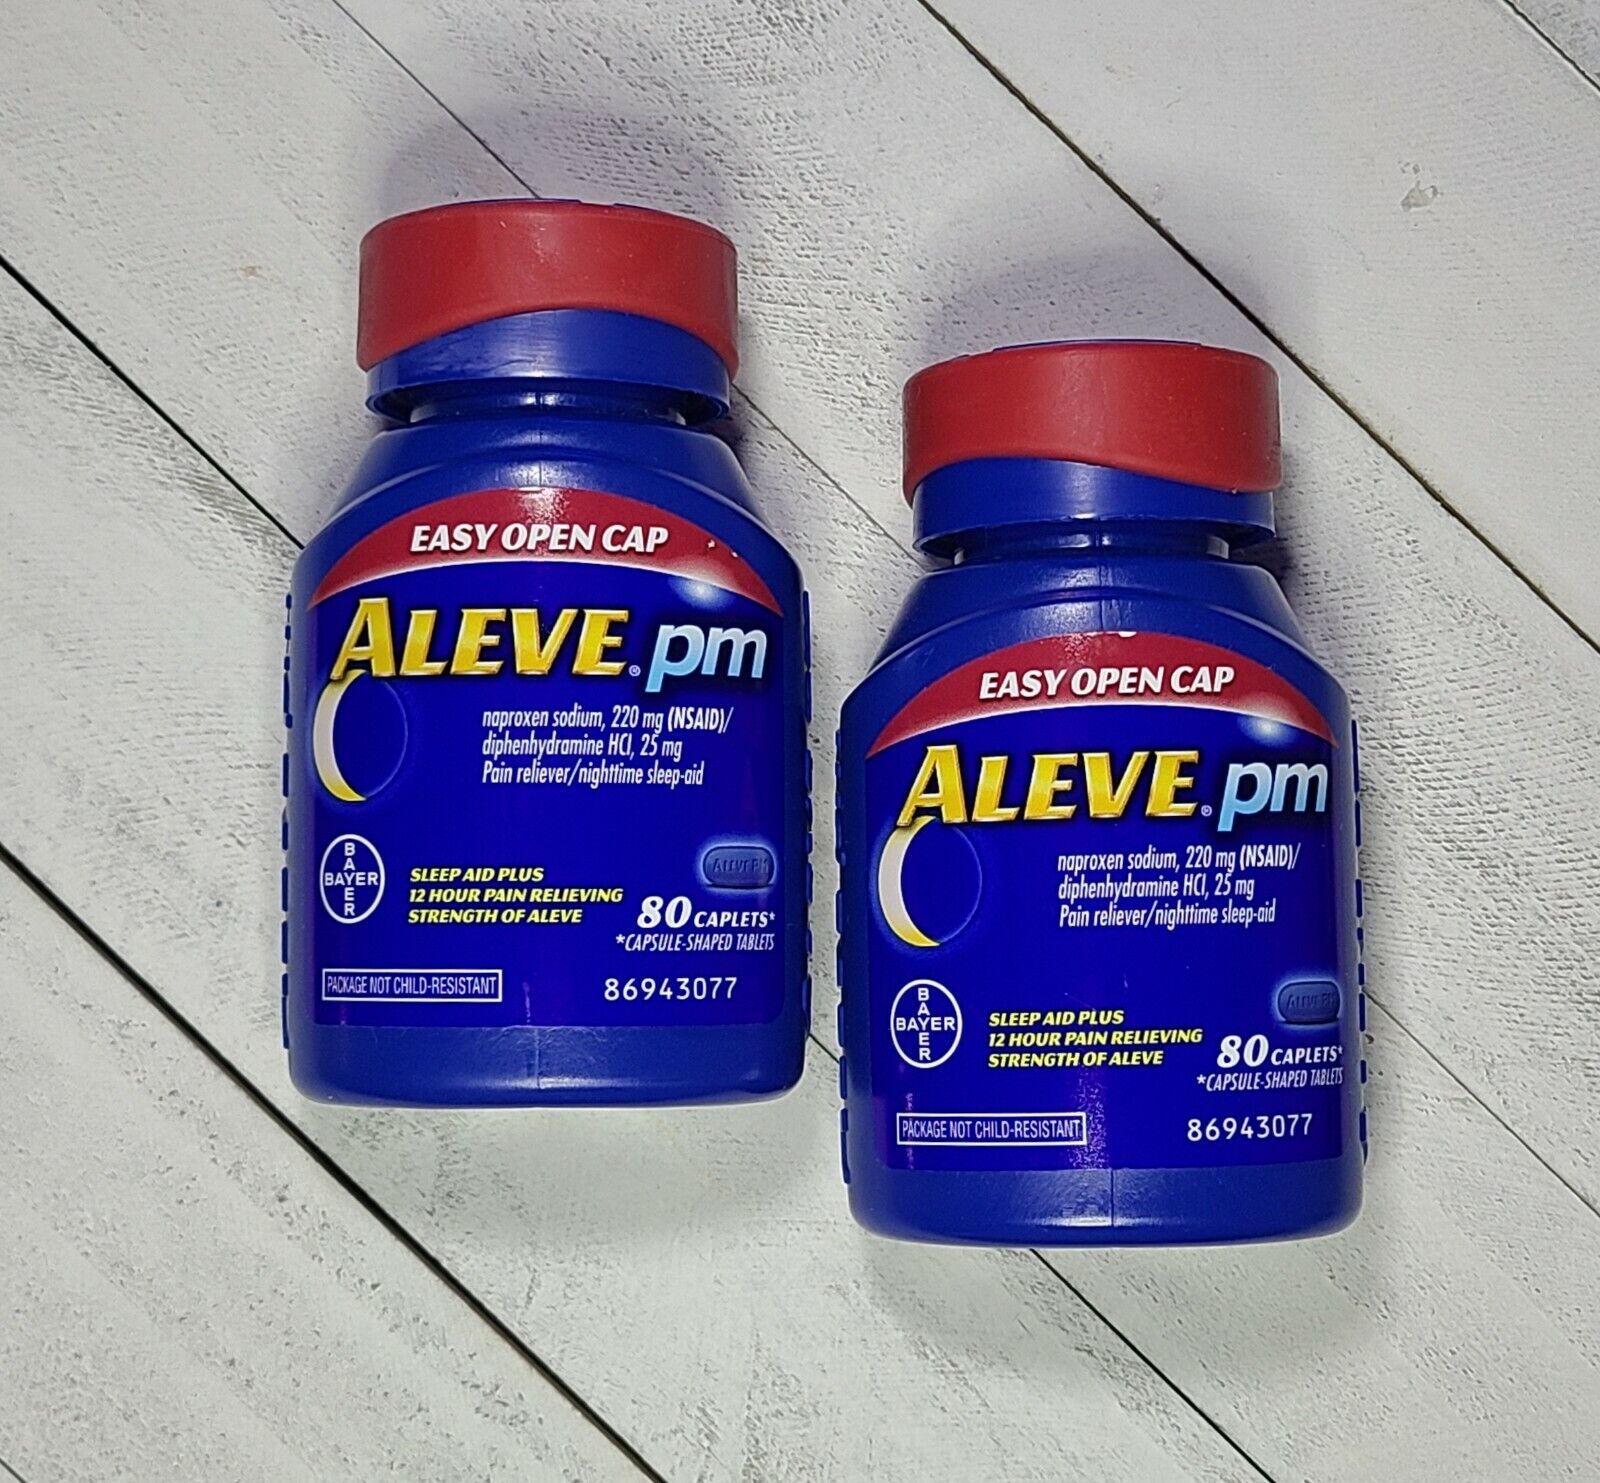 (2x) Aleve PM Pain Reliever/Nighttime Sleep-Aid (80+80=160) Caplets Exp 11/2022